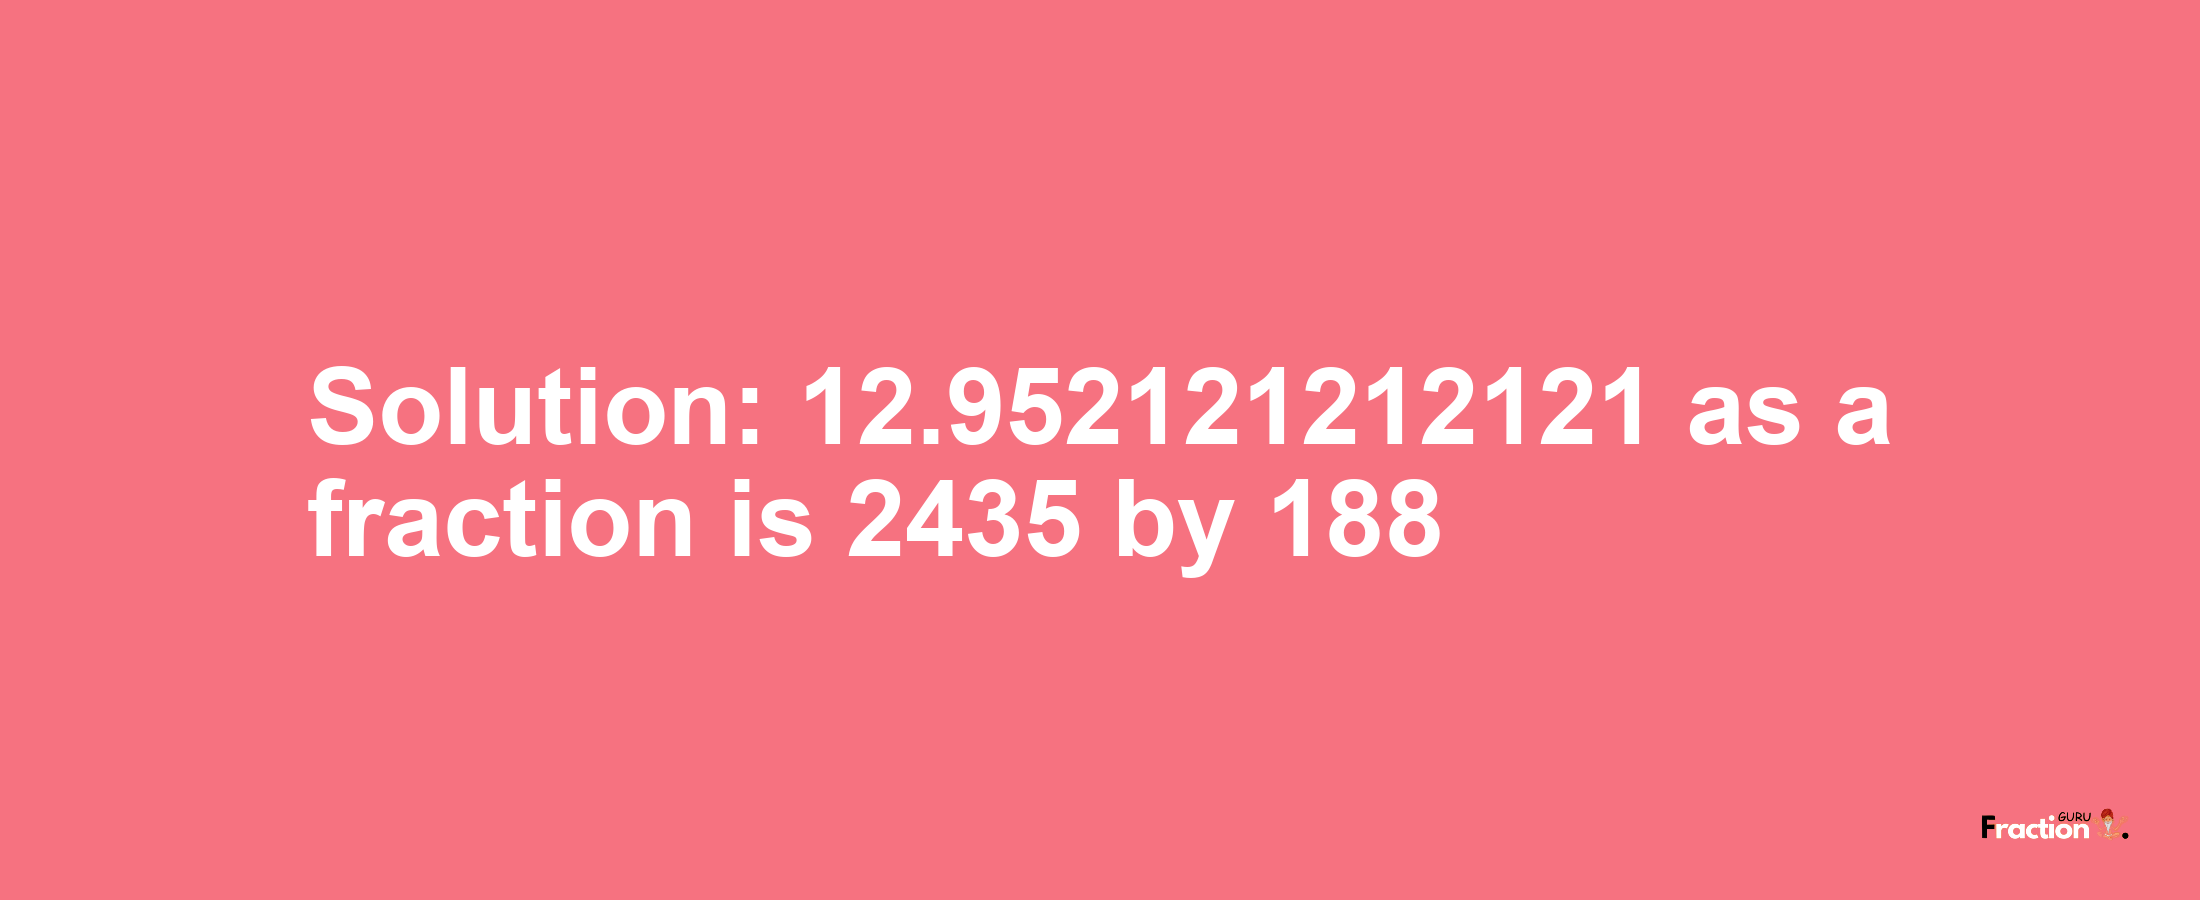 Solution:12.952121212121 as a fraction is 2435/188